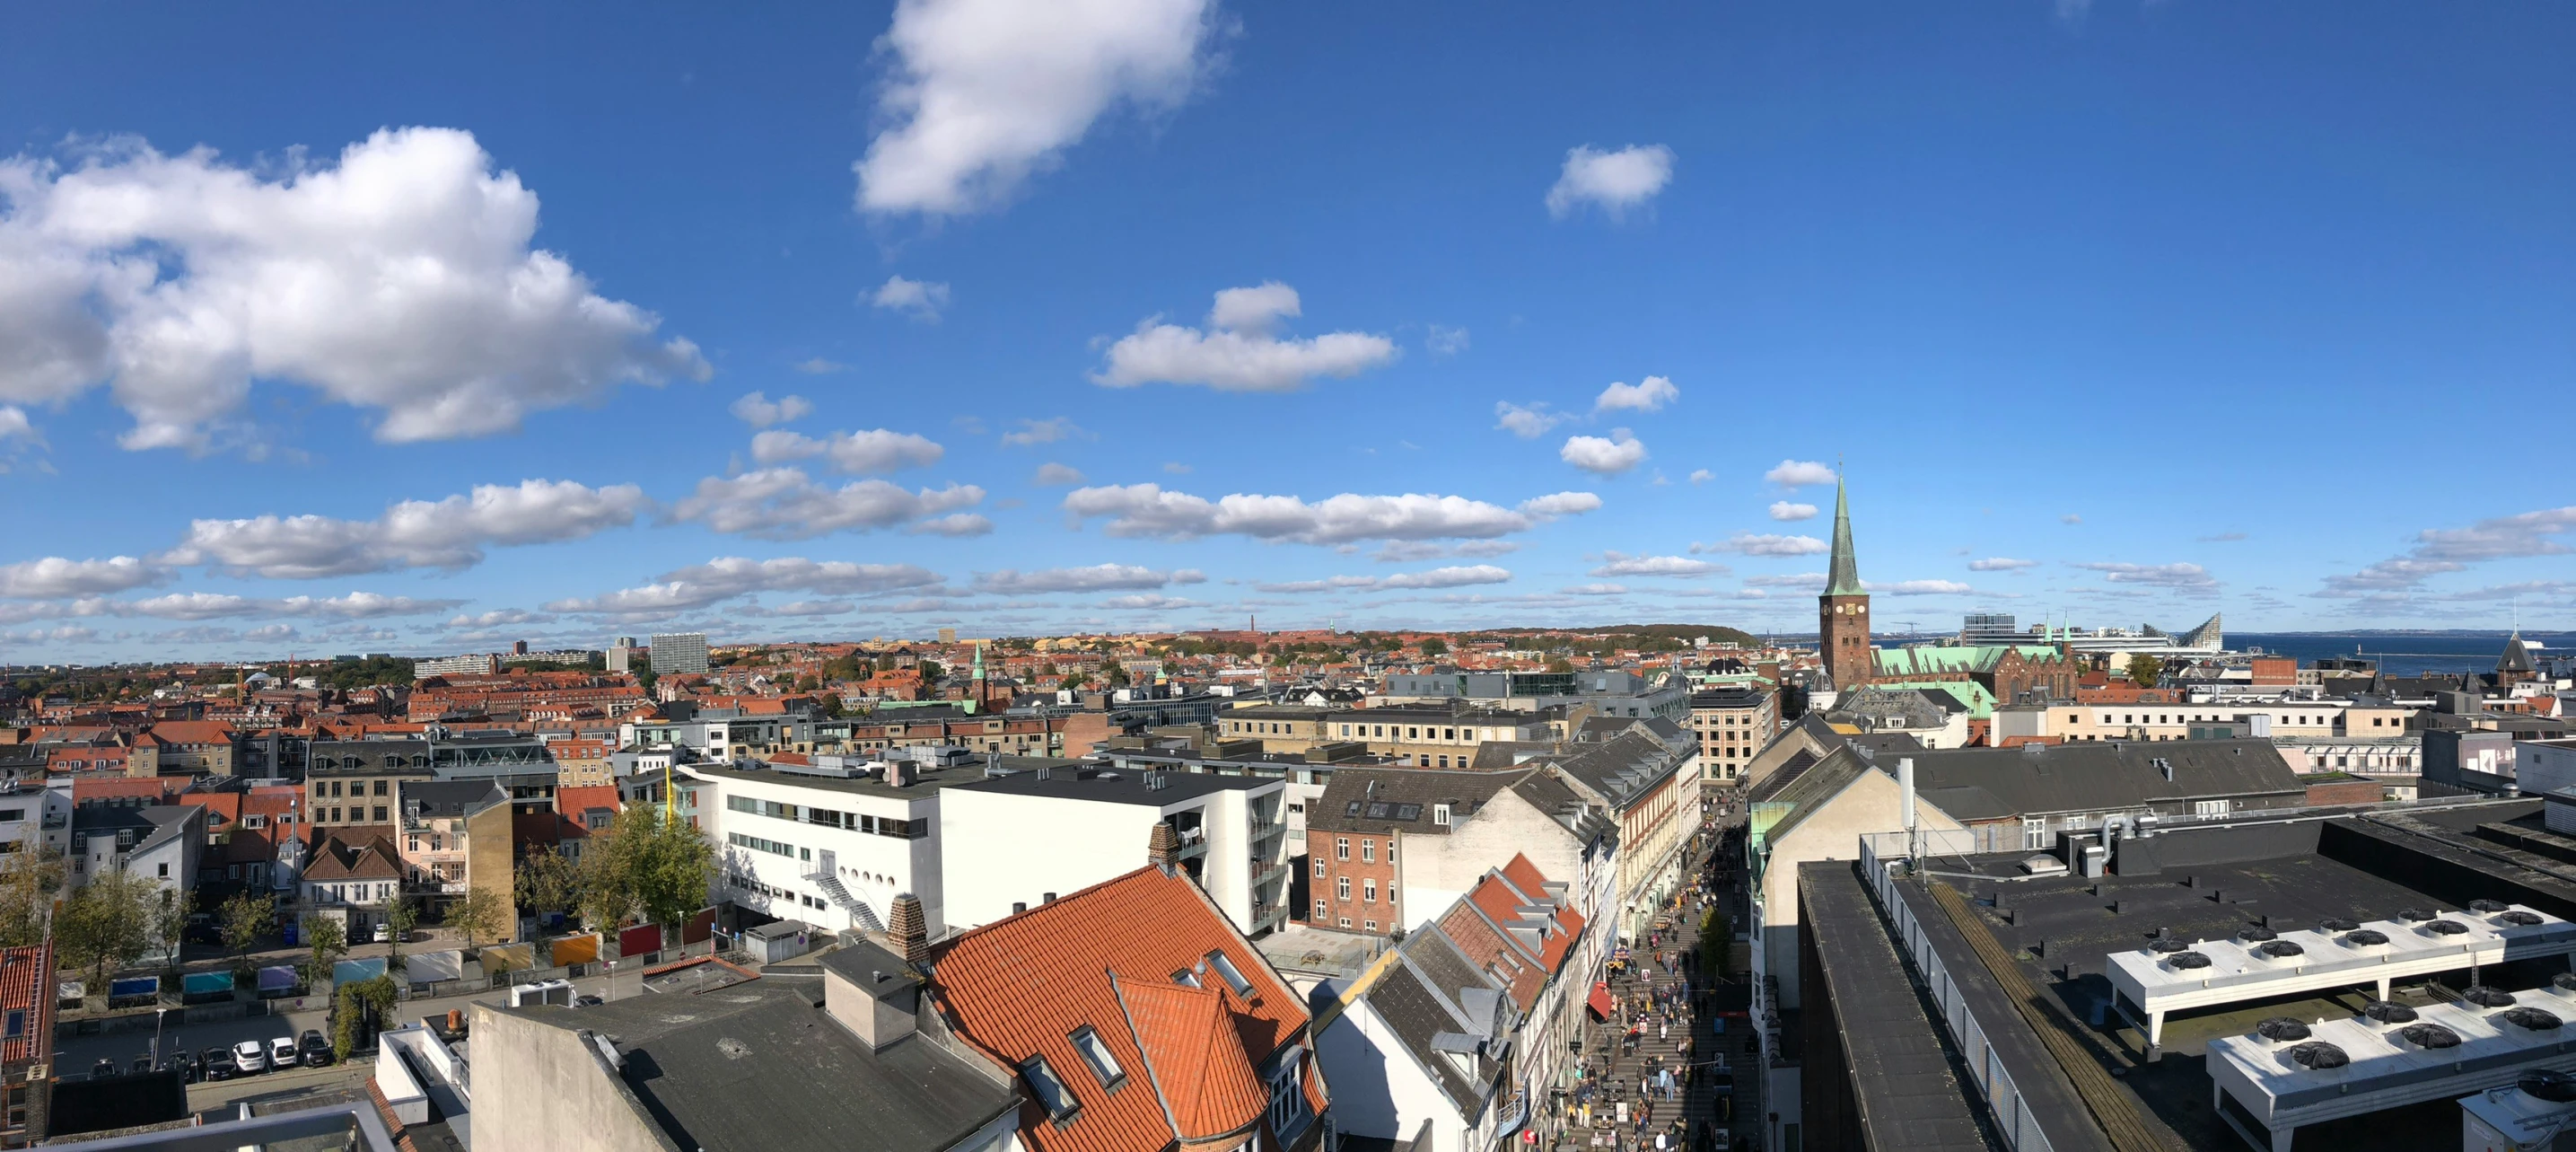 a panoramic view of an urban area with a blue sky and clouds